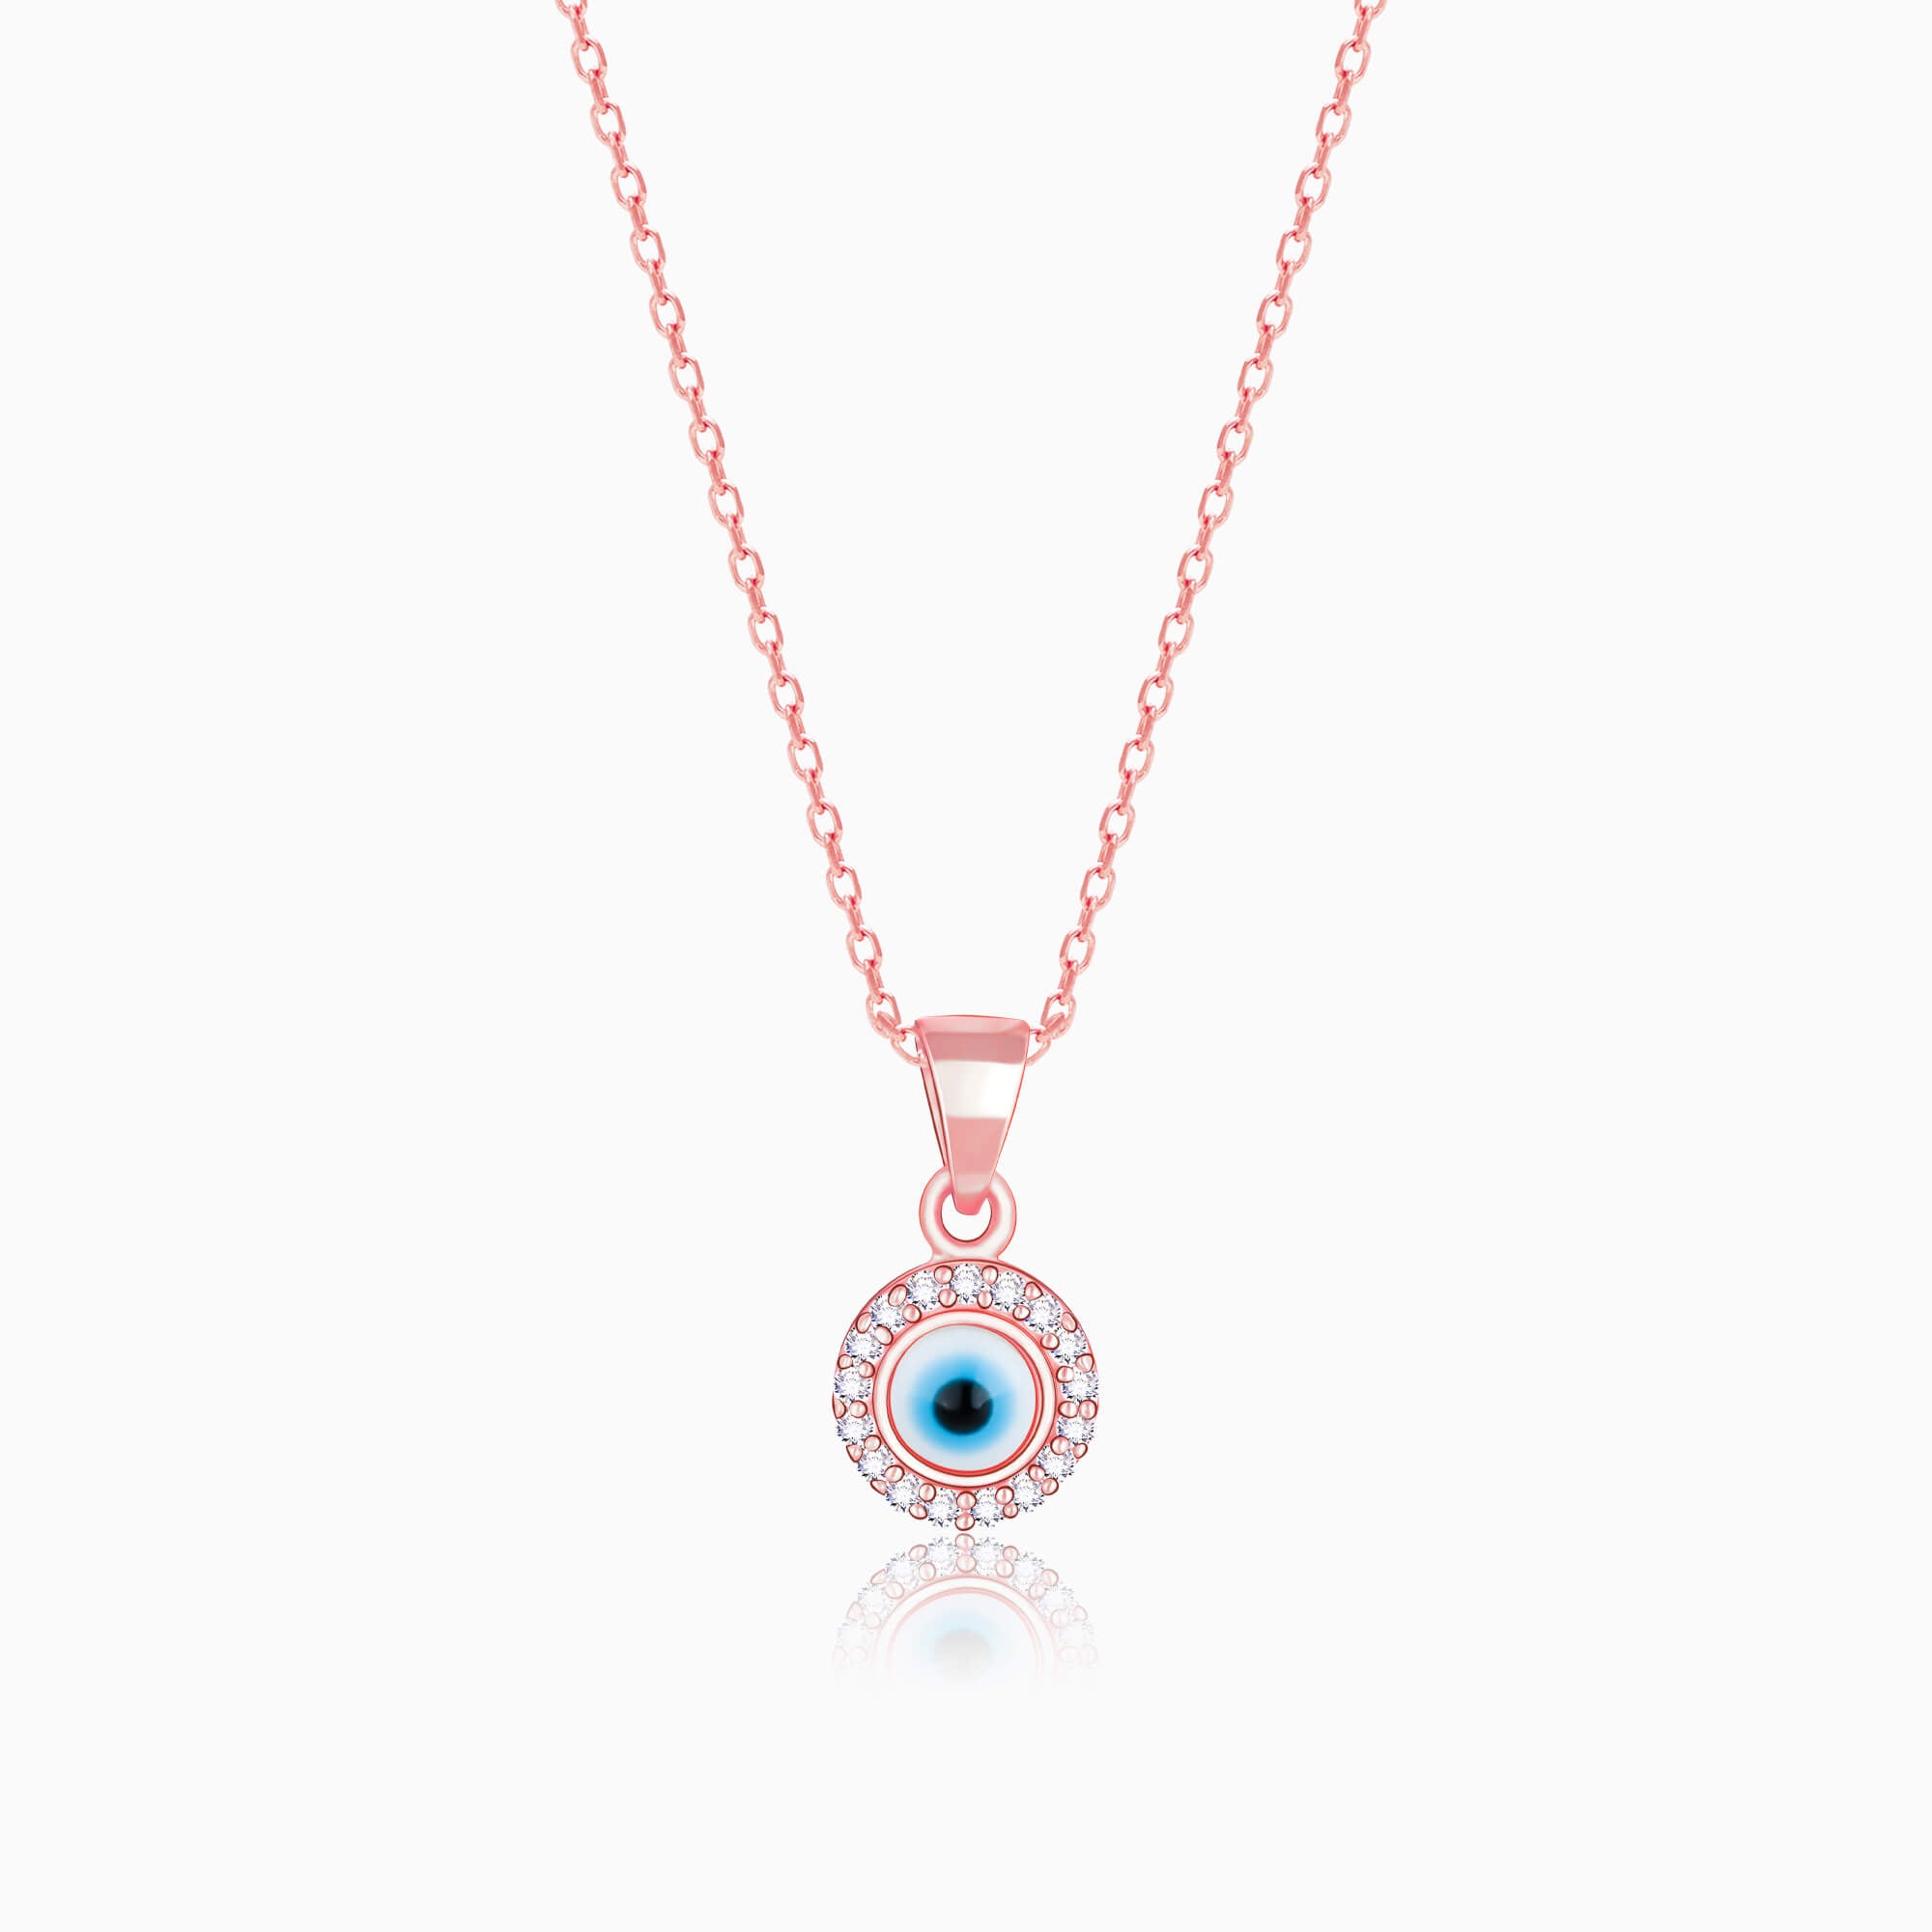 HEQU Blue Eye Necklace Lucky Amulet, Evil Eye Jewelry Protection Gift -  Walmart.com